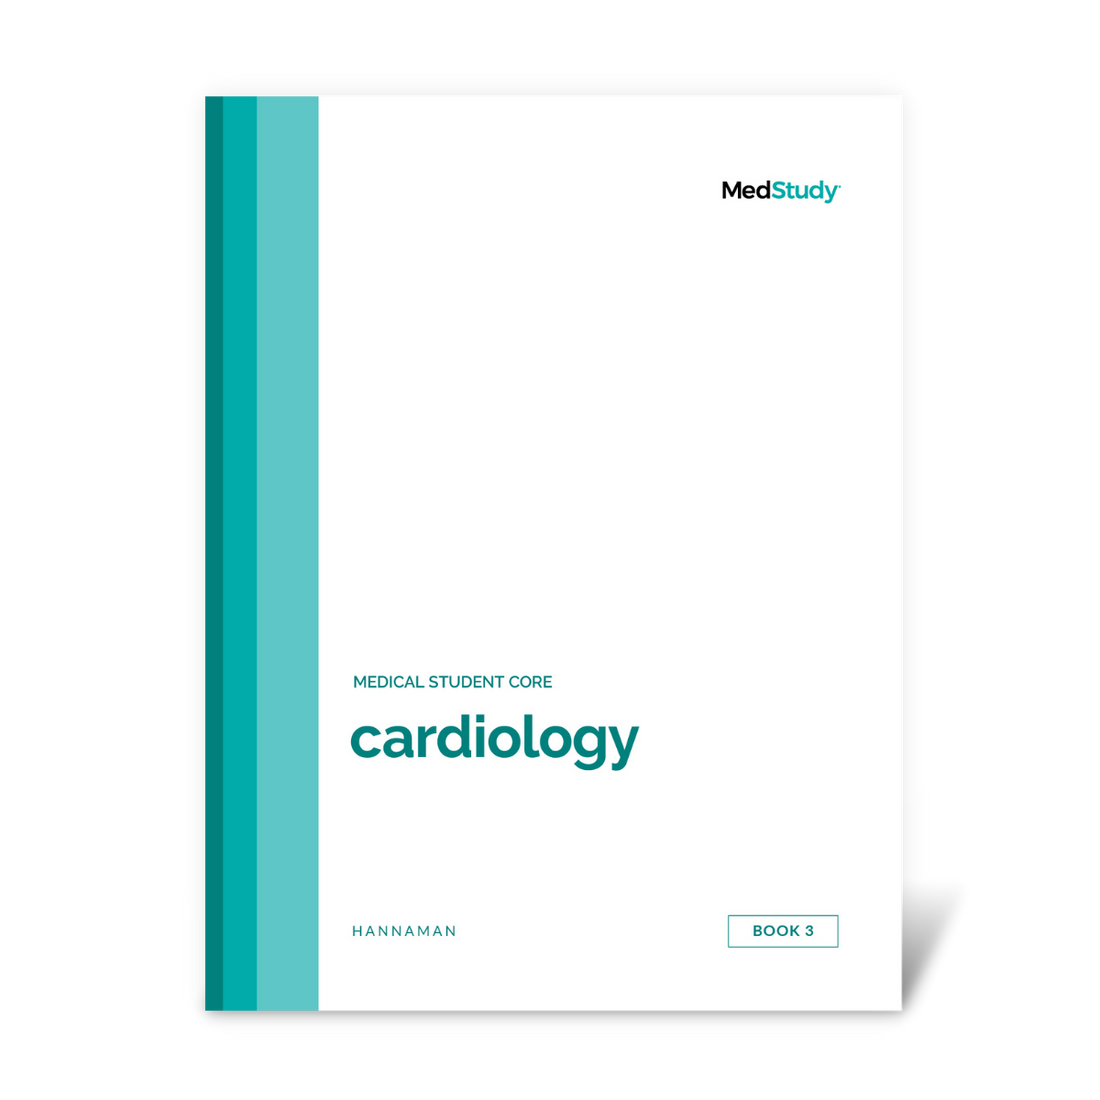 Cardiology book cover with green variant of stripes down the left side